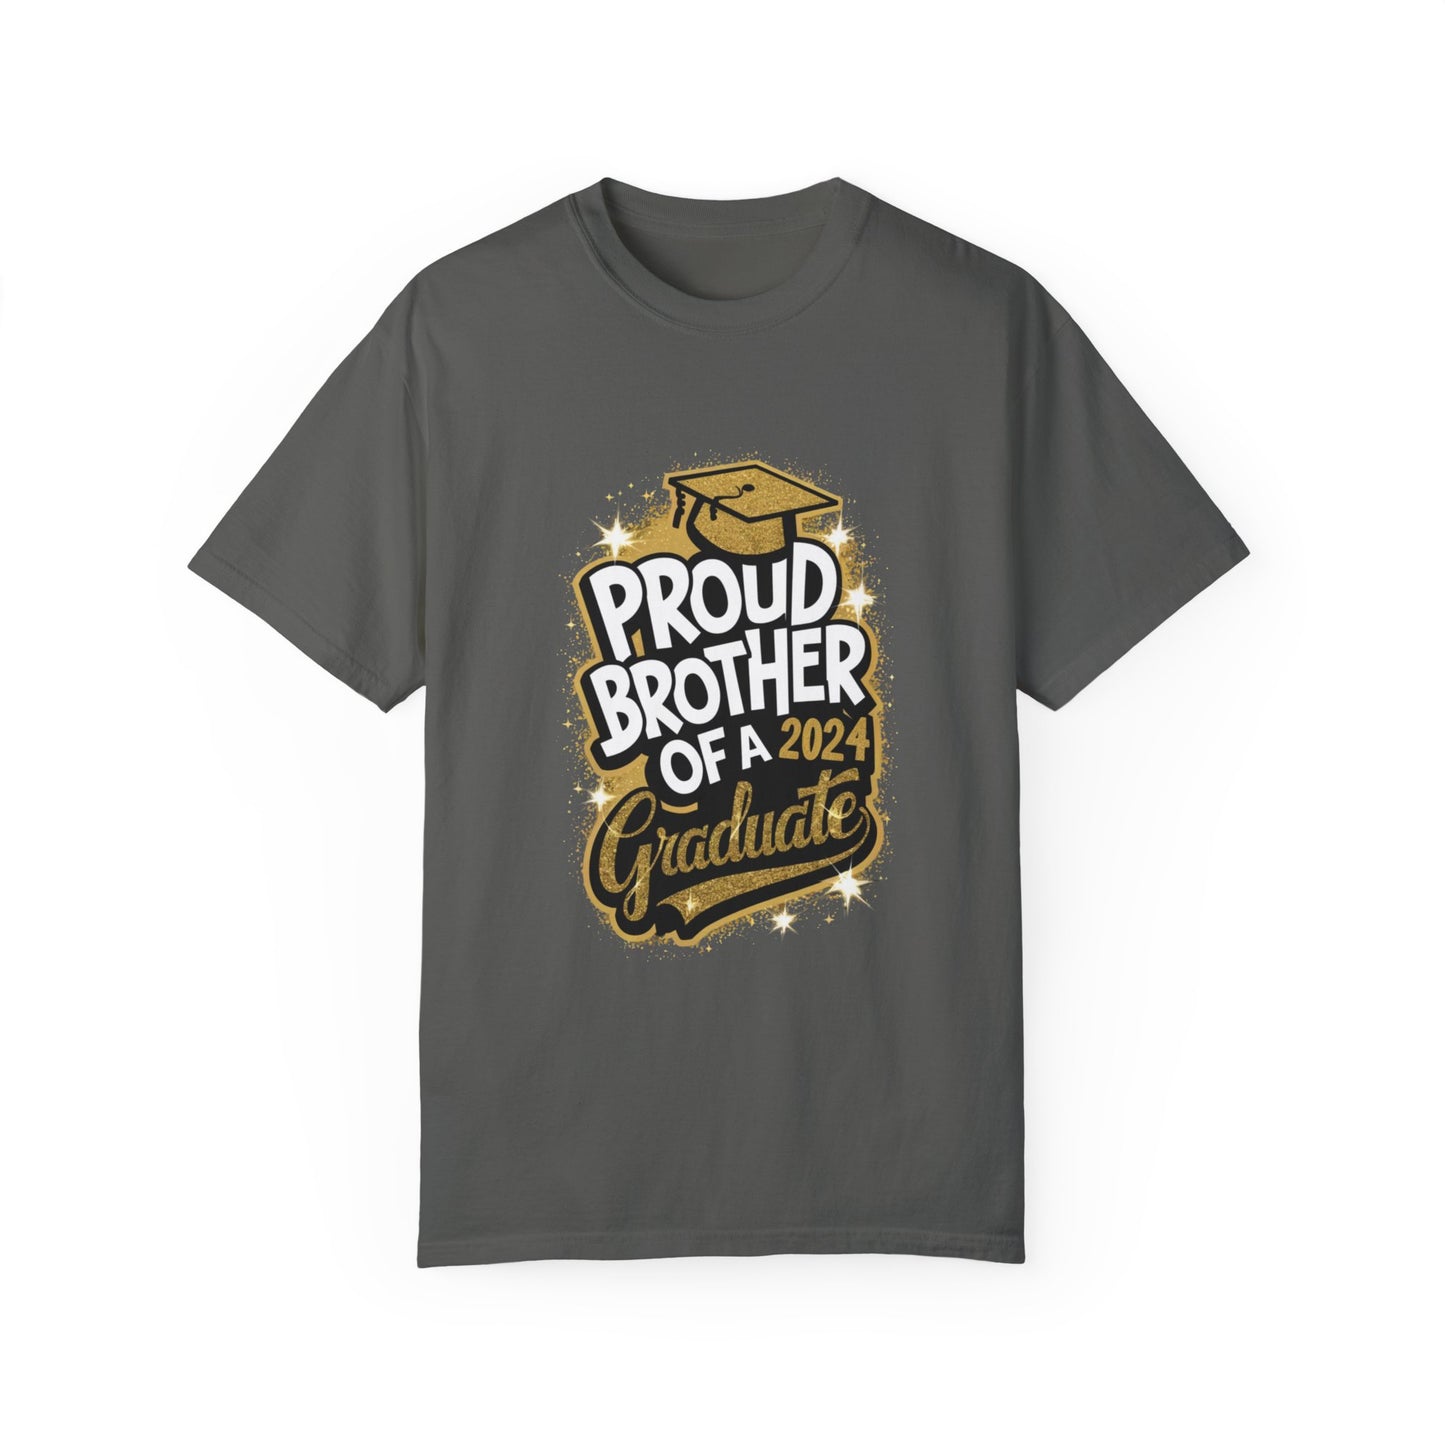 Proud Brother of a 2024 Graduate Unisex Garment-dyed T-shirt Cotton Funny Humorous Graphic Soft Premium Unisex Men Women Pepper T-shirt Birthday Gift-12